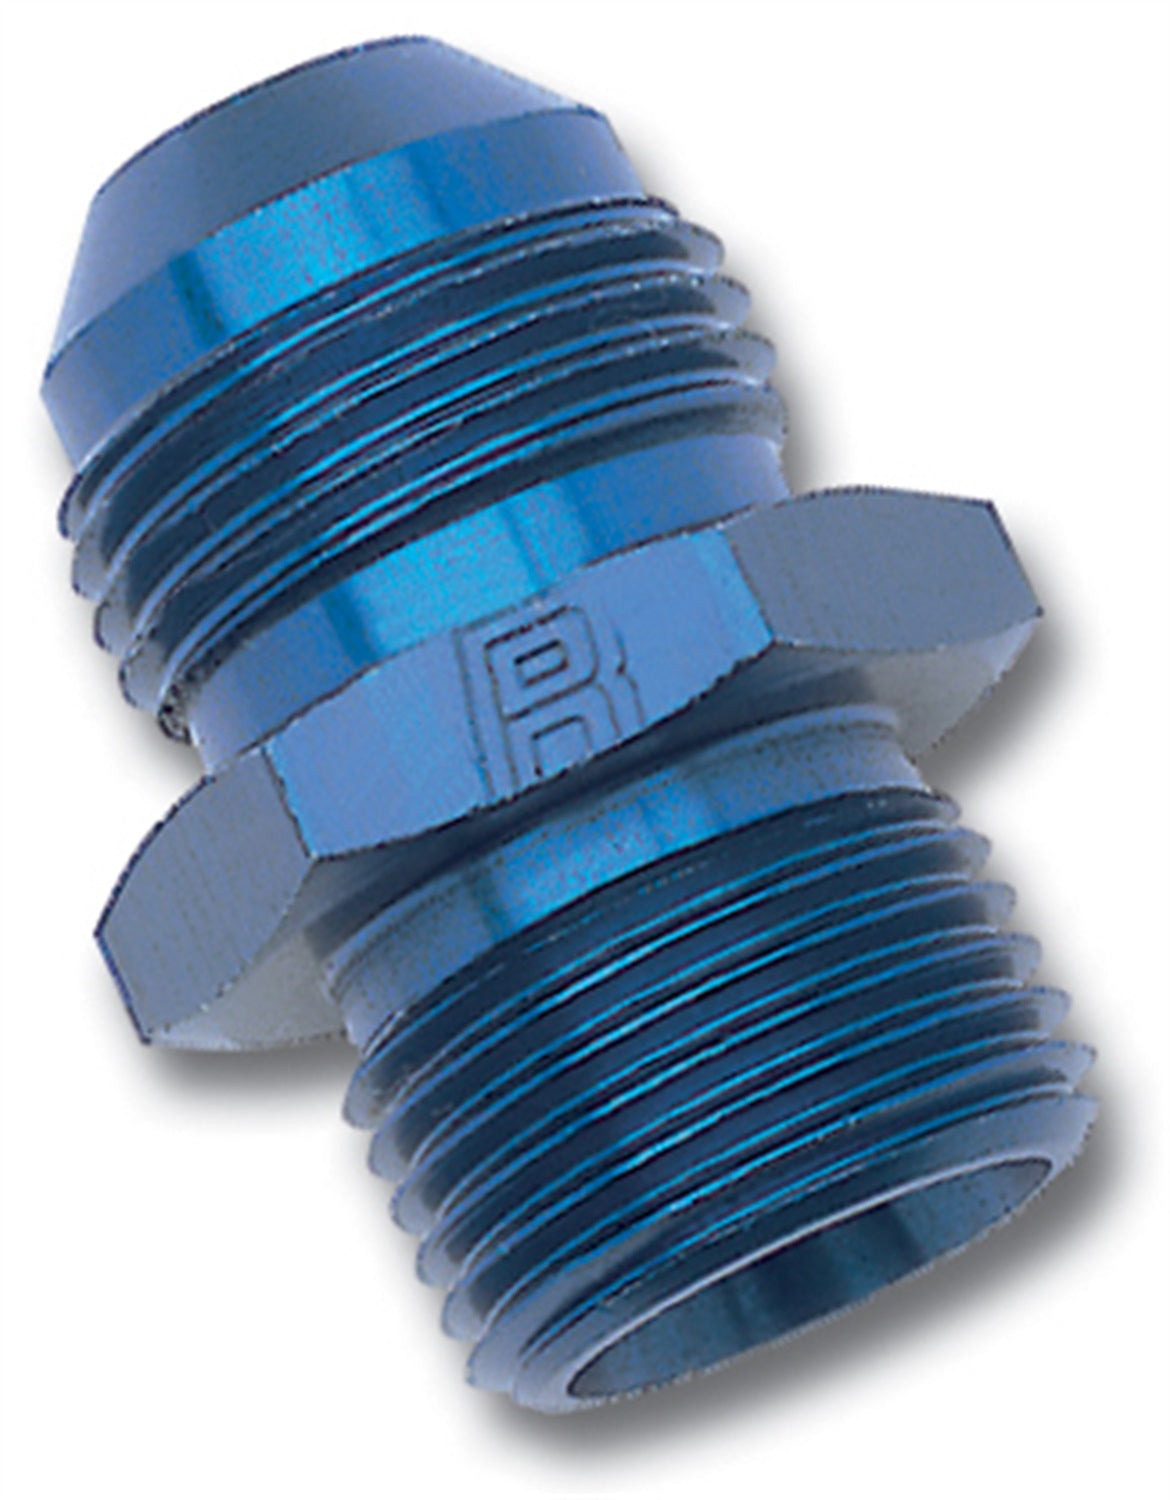 670190 | ADAPTER FITTING #12 AN MALE FLARE TO 20MM X 1.5 MALE BLUE ANODIZED